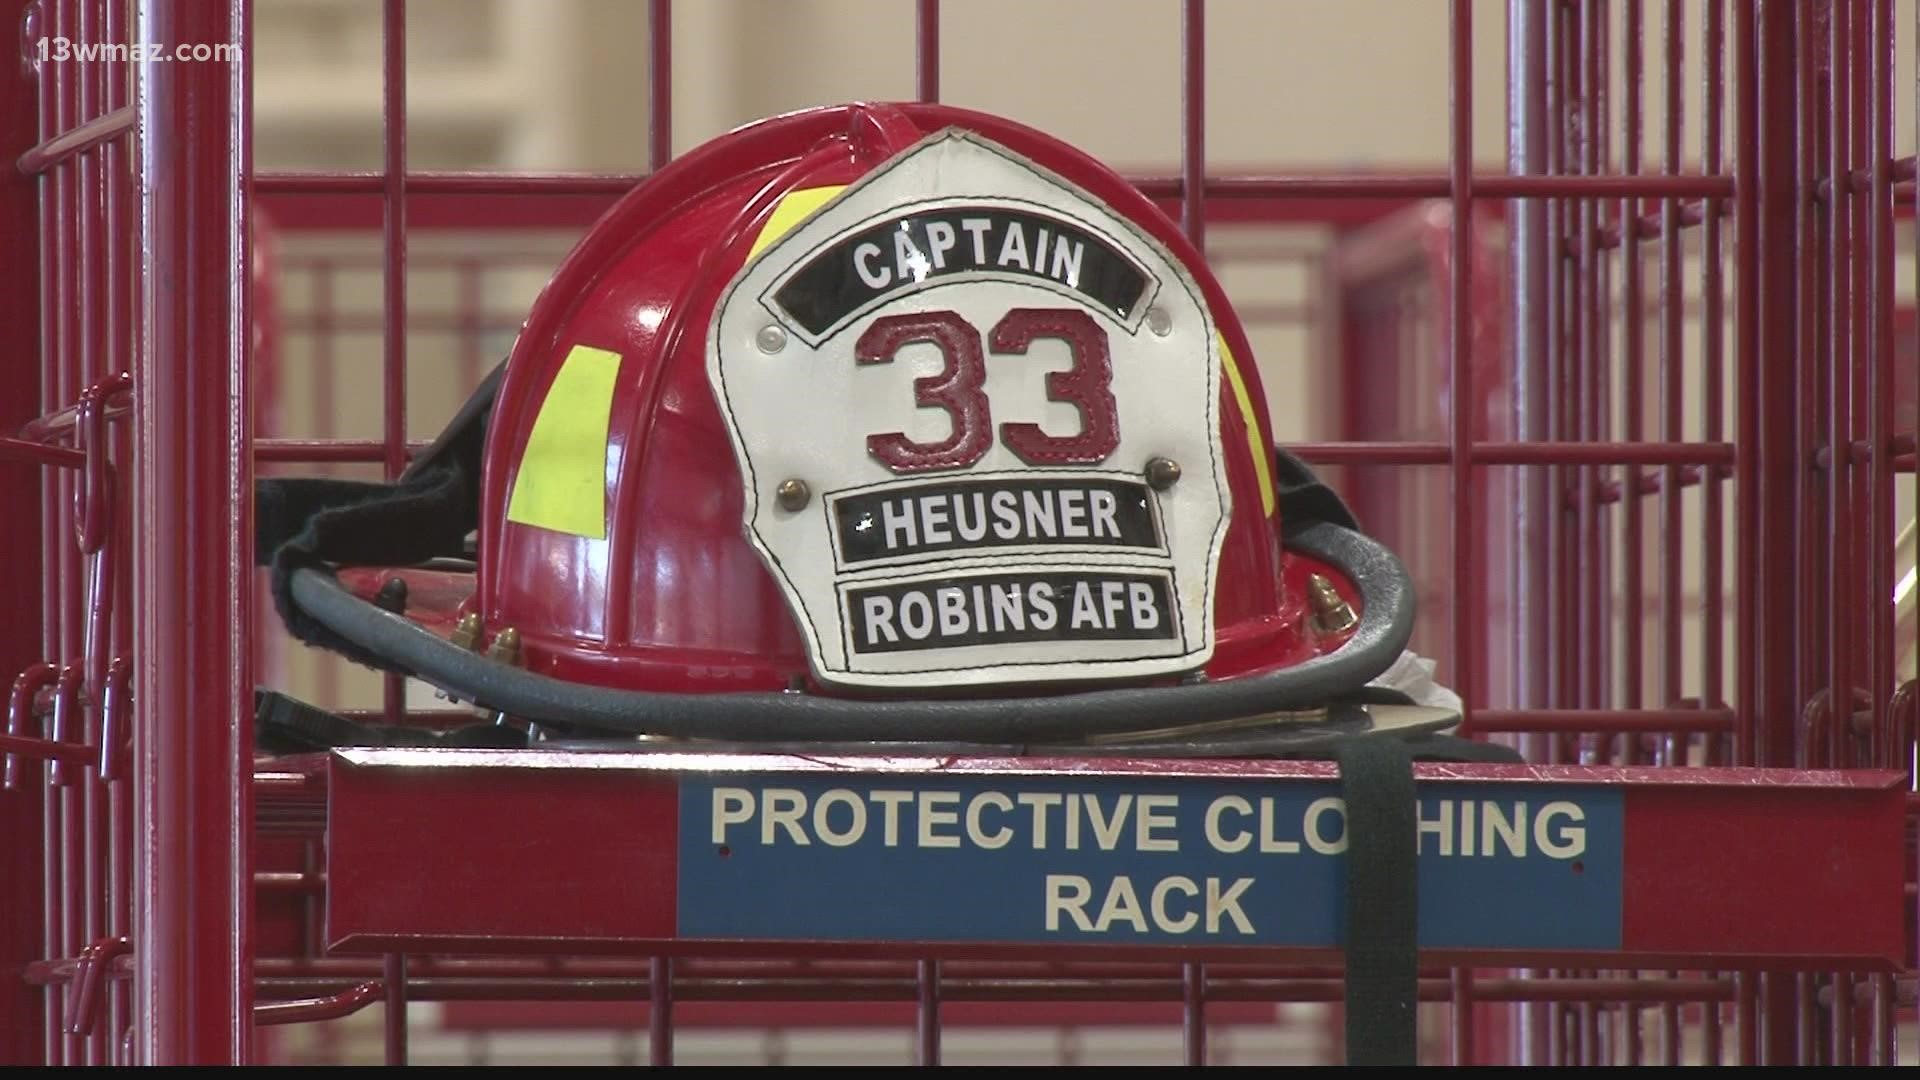 After the attacks, firefighters at Robins had to prepare for every possible threat to keep the base safe